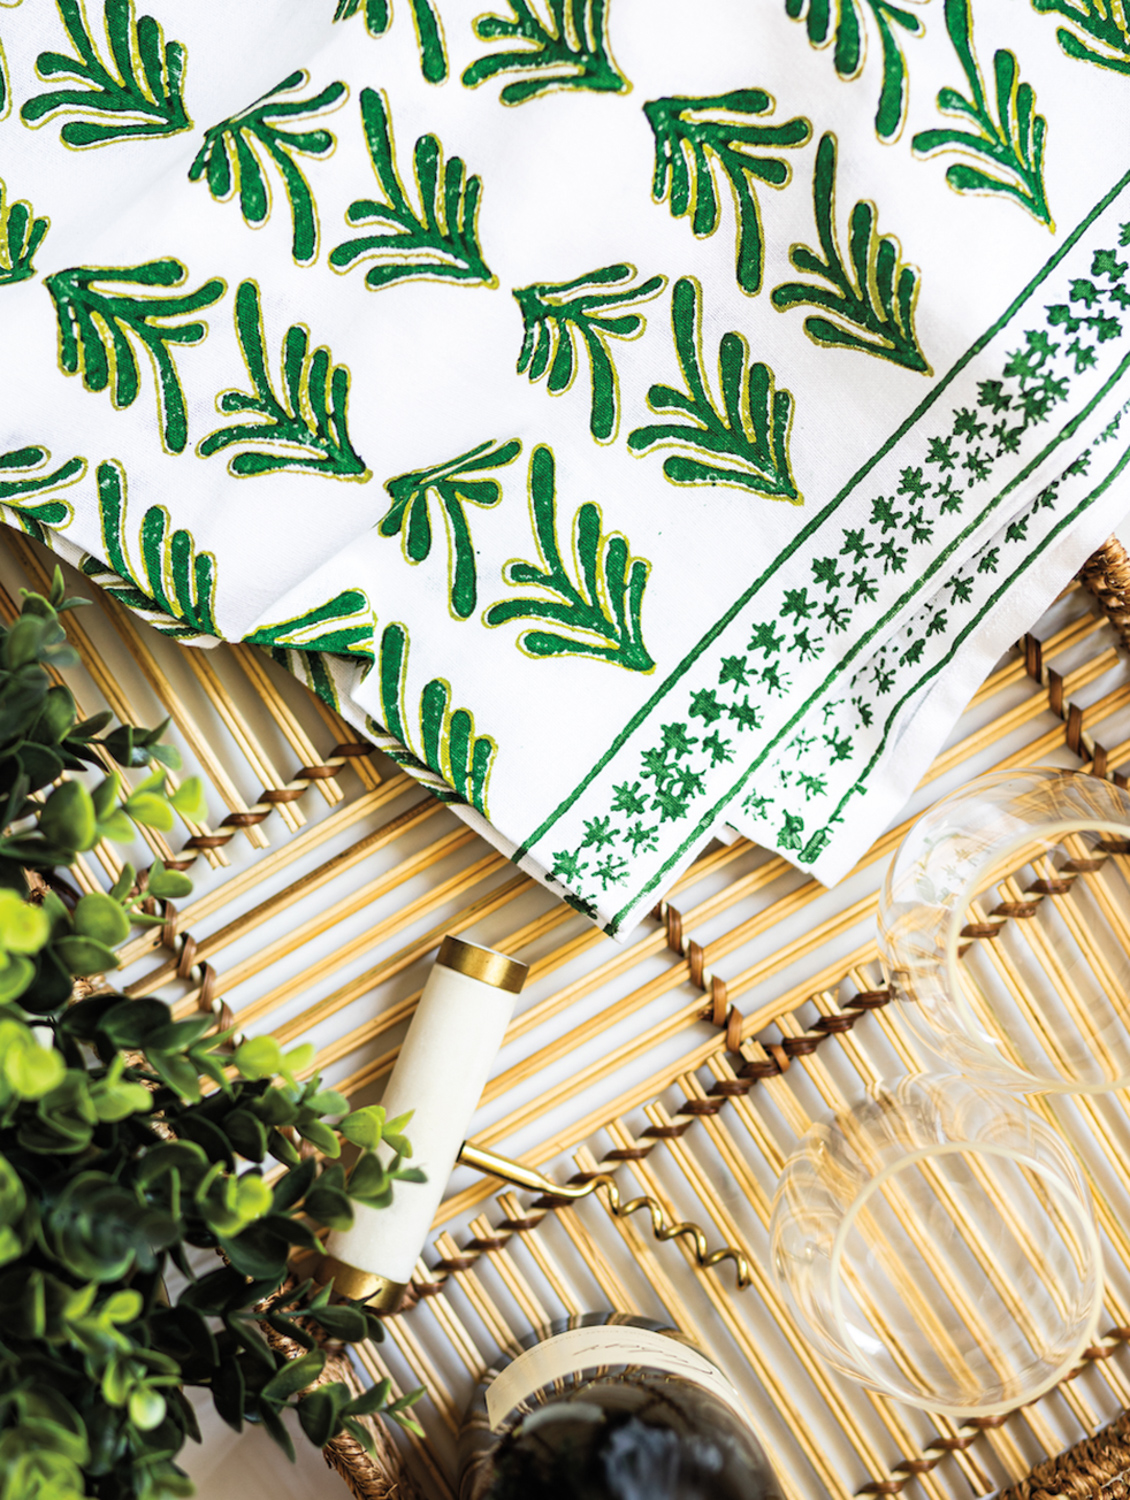 Wood-block printed table linens with a green and gold leafy pattern